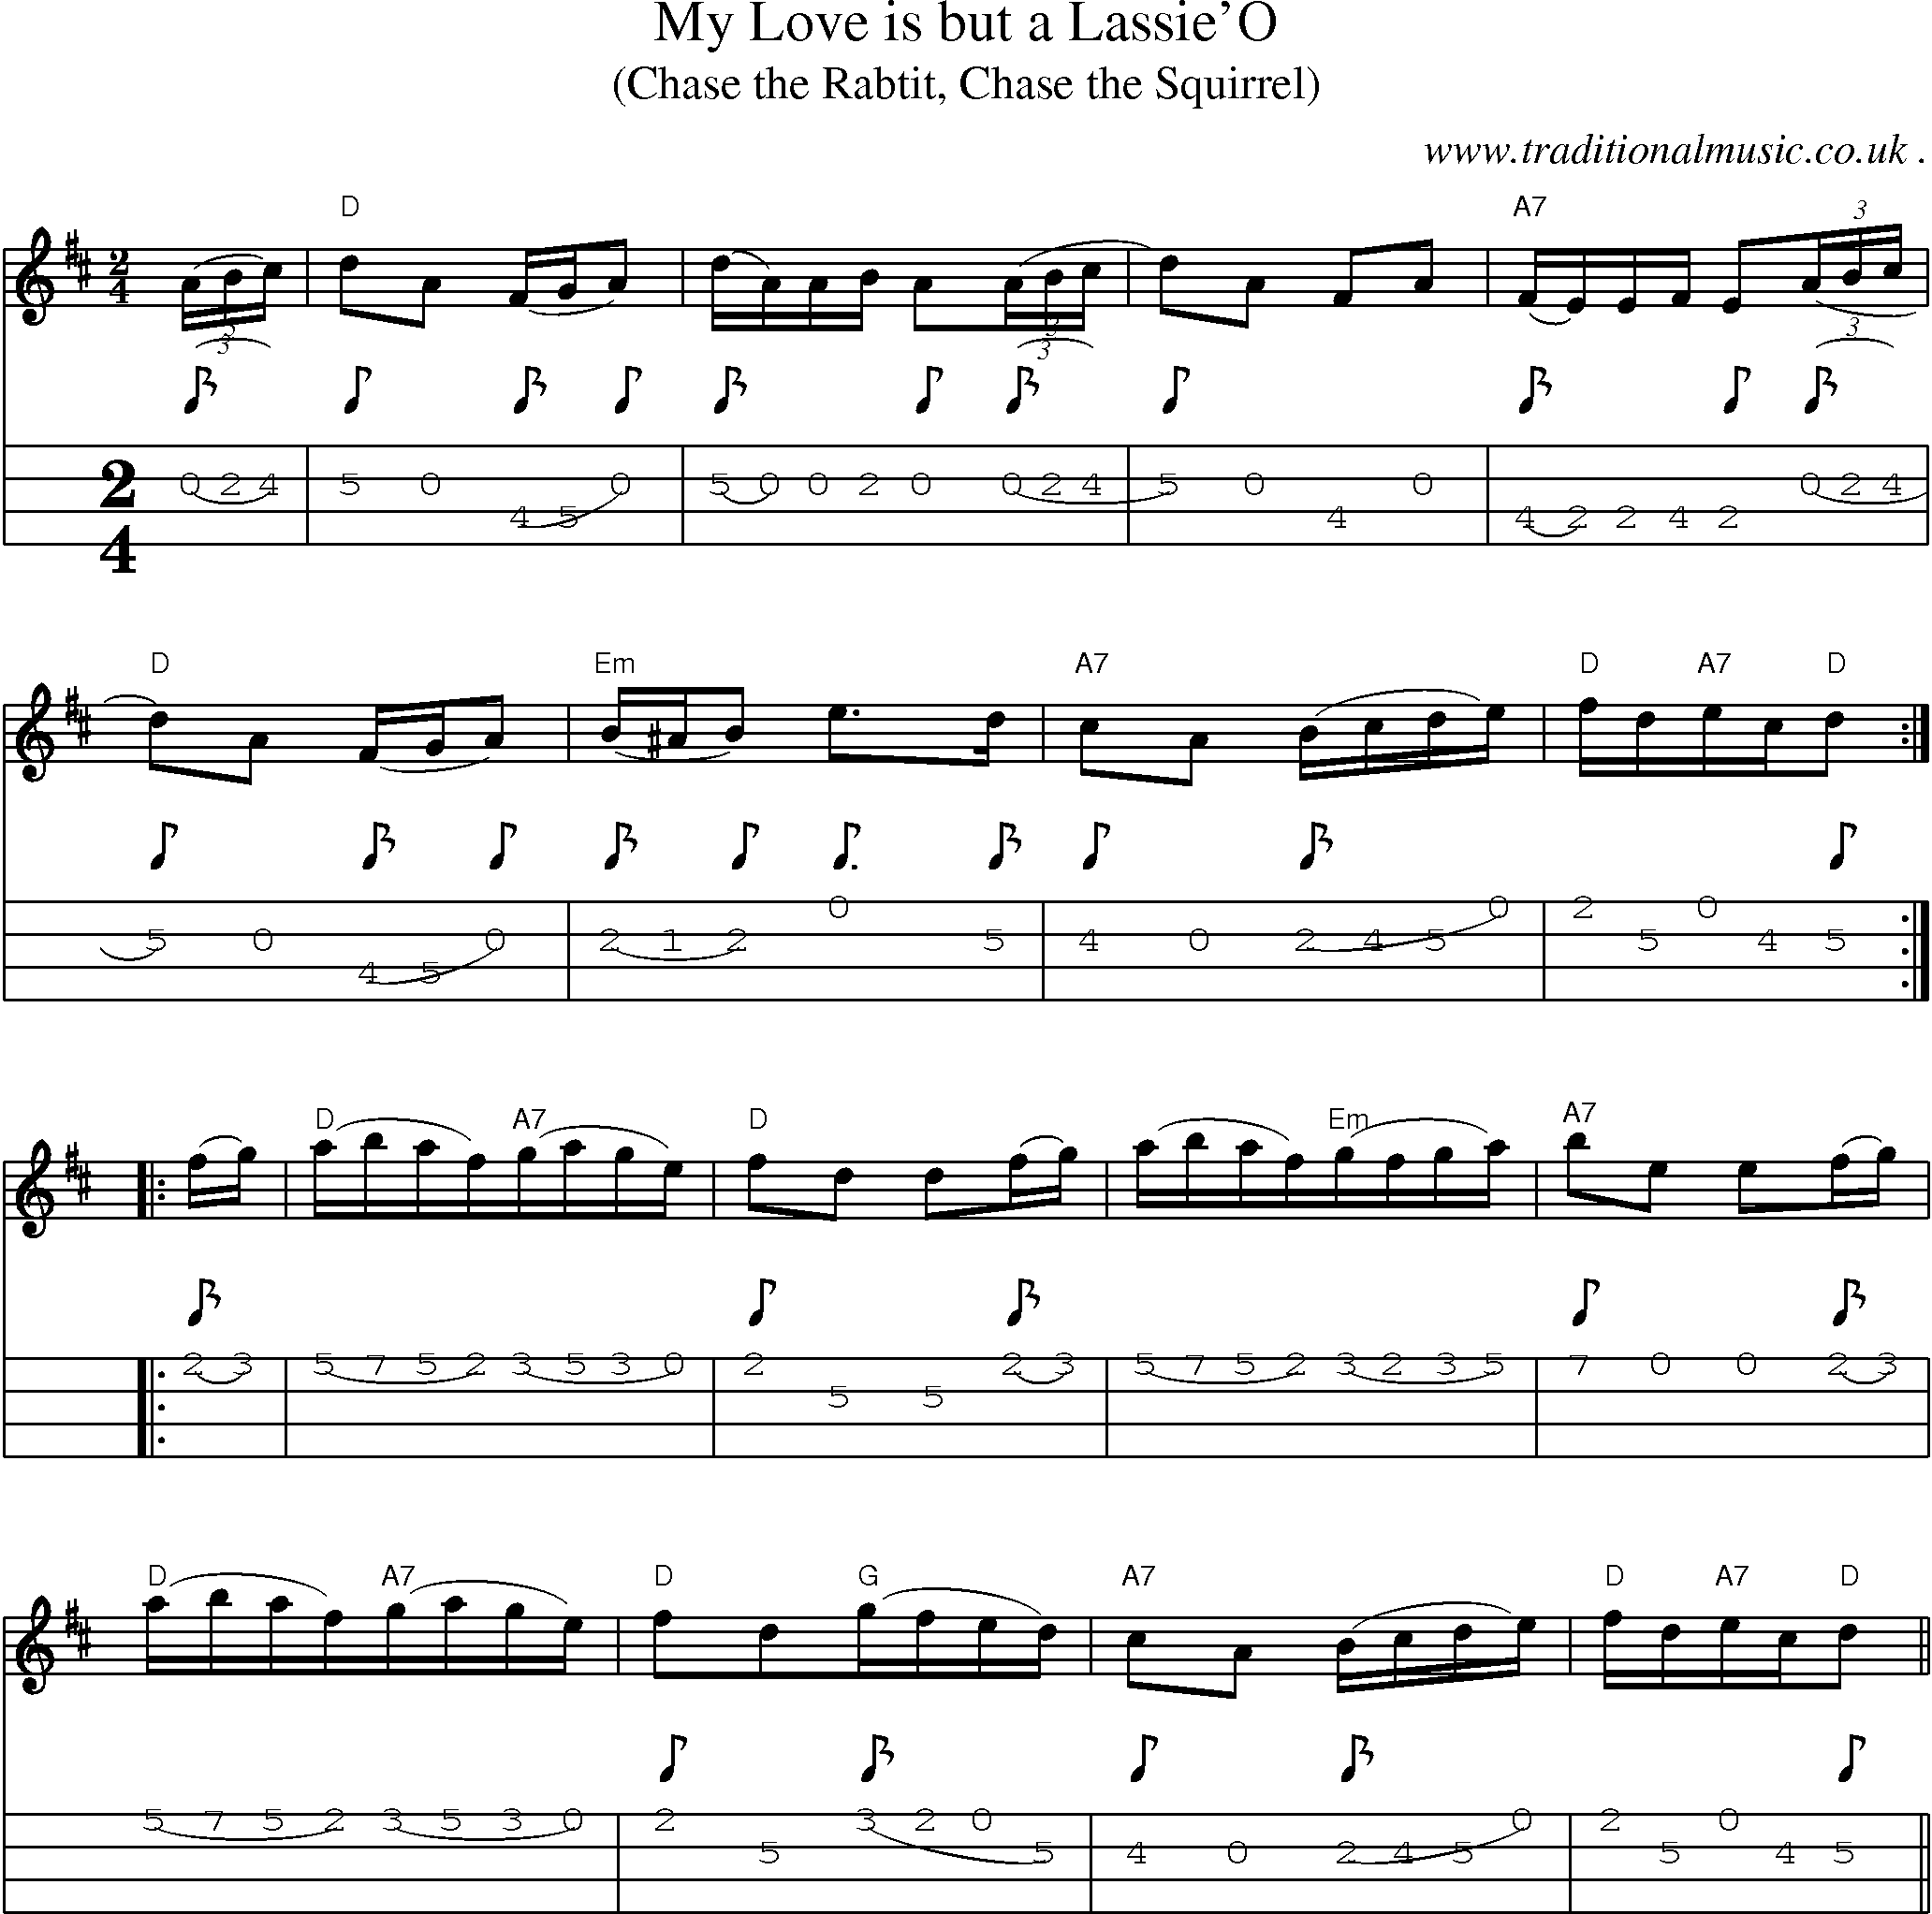 Sheet-Music and Mandolin Tabs for My Love Is But A Lassieo